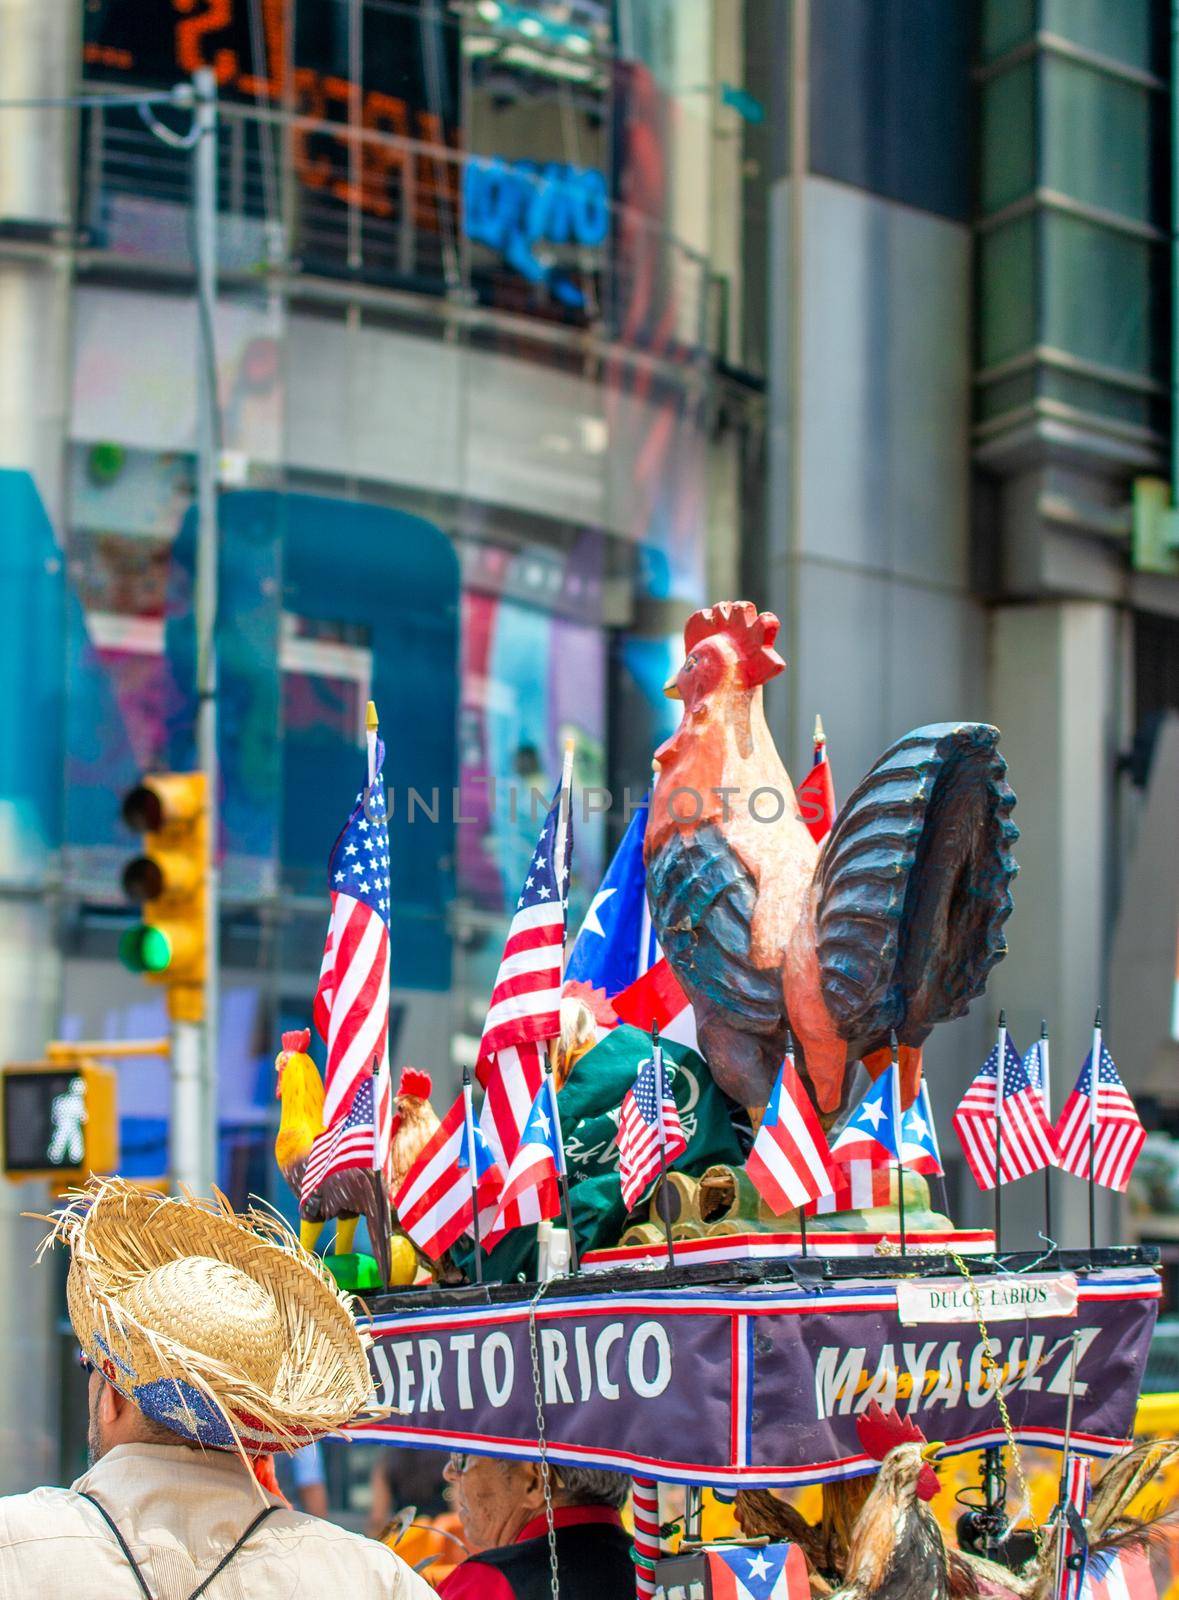 NEW YORK CITY - JUNE 11, 2013: Tourists in Times Square during a Puerto Rico festival.